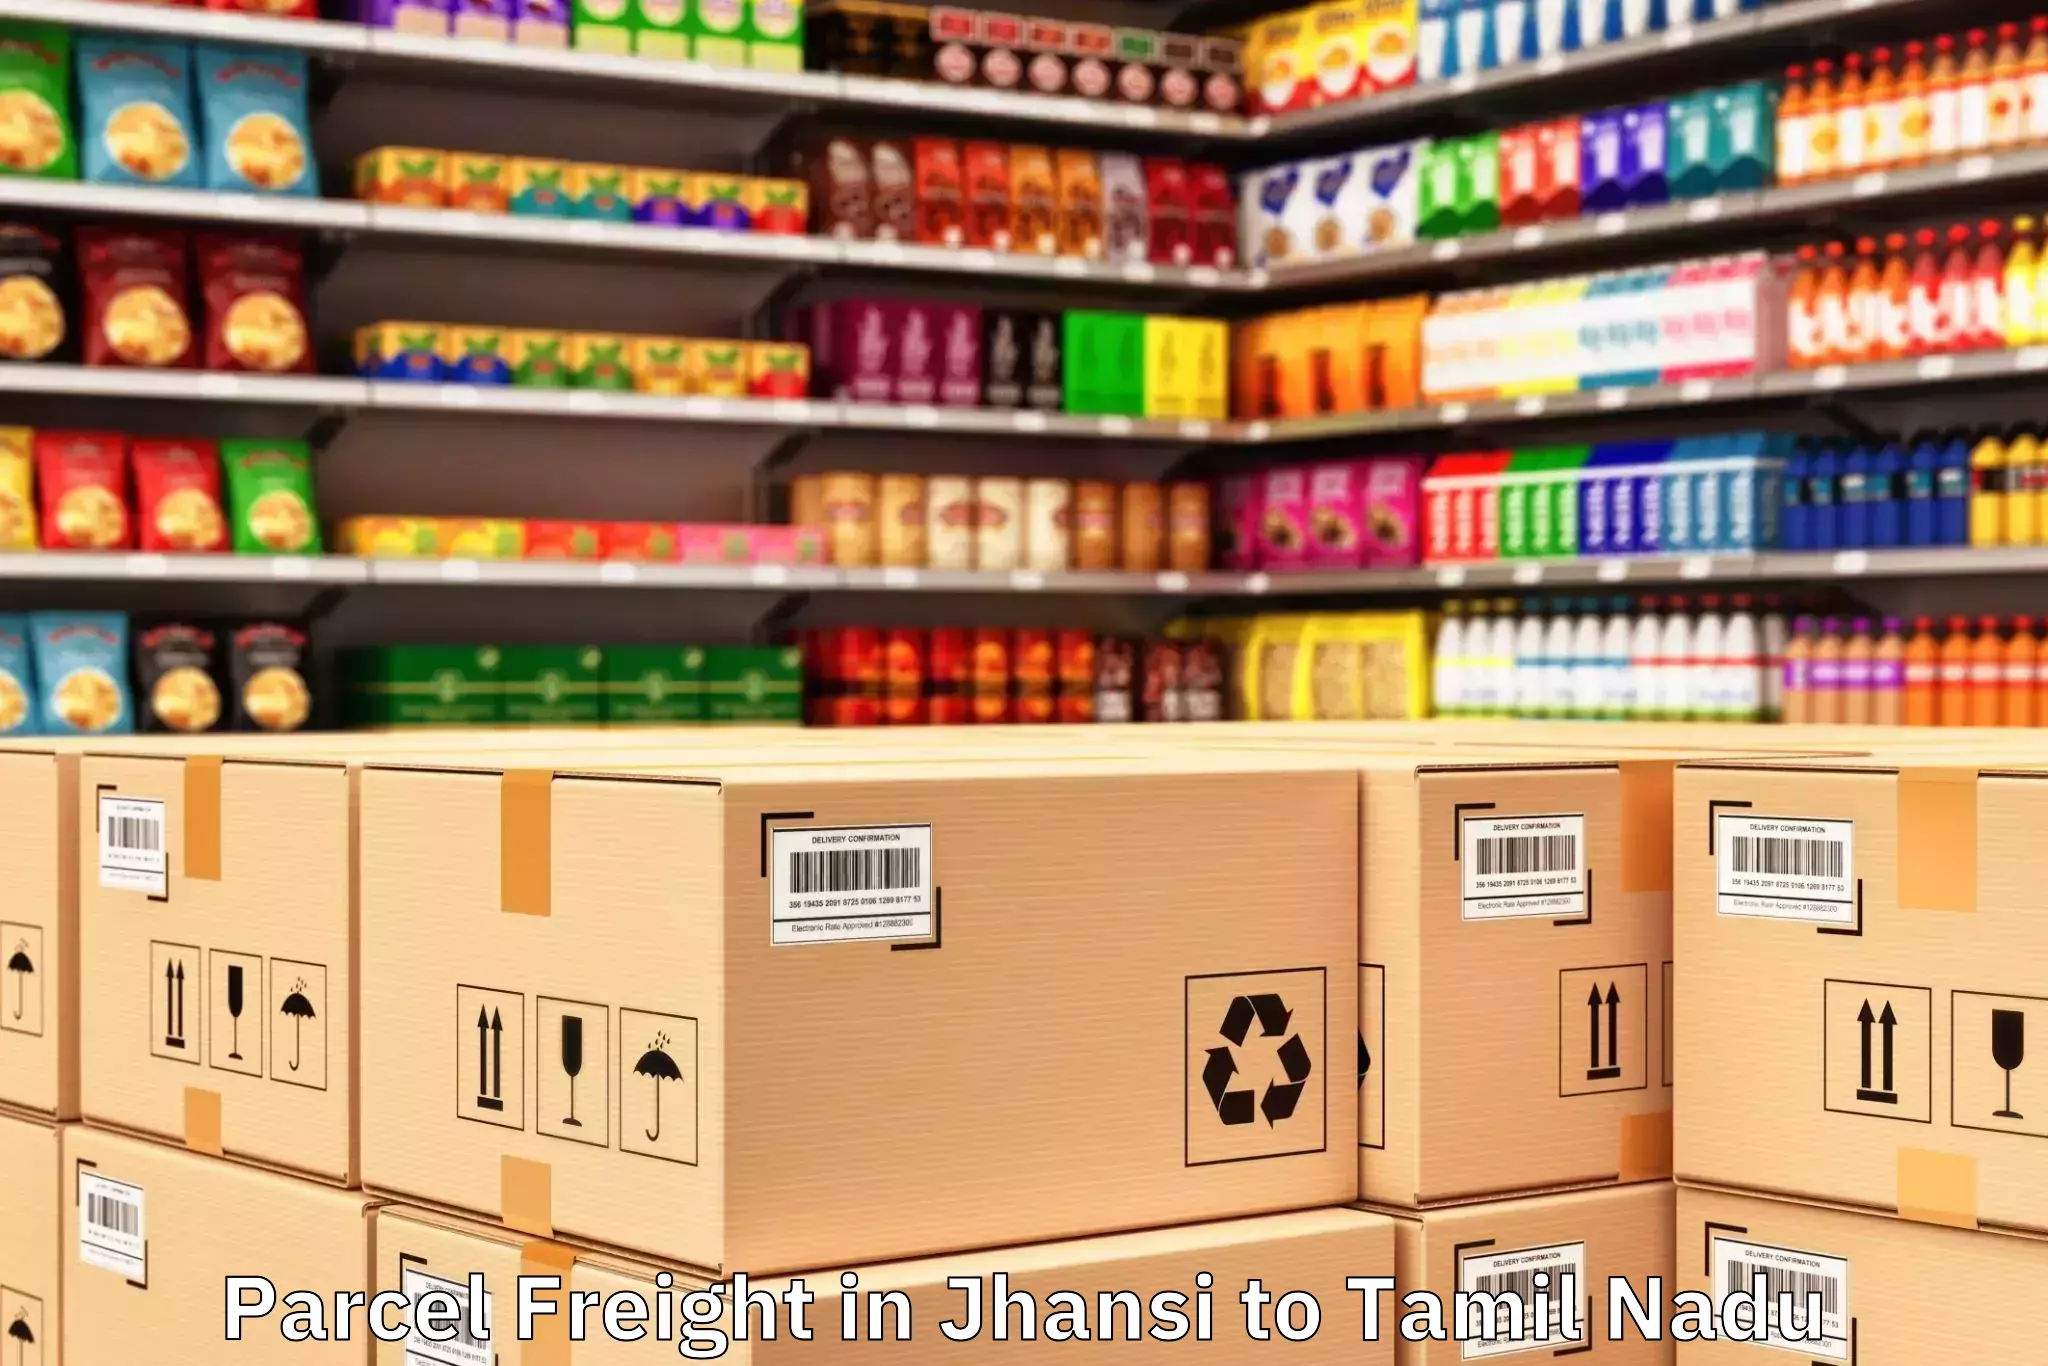 Quality Jhansi to Mangalam Parcel Freight